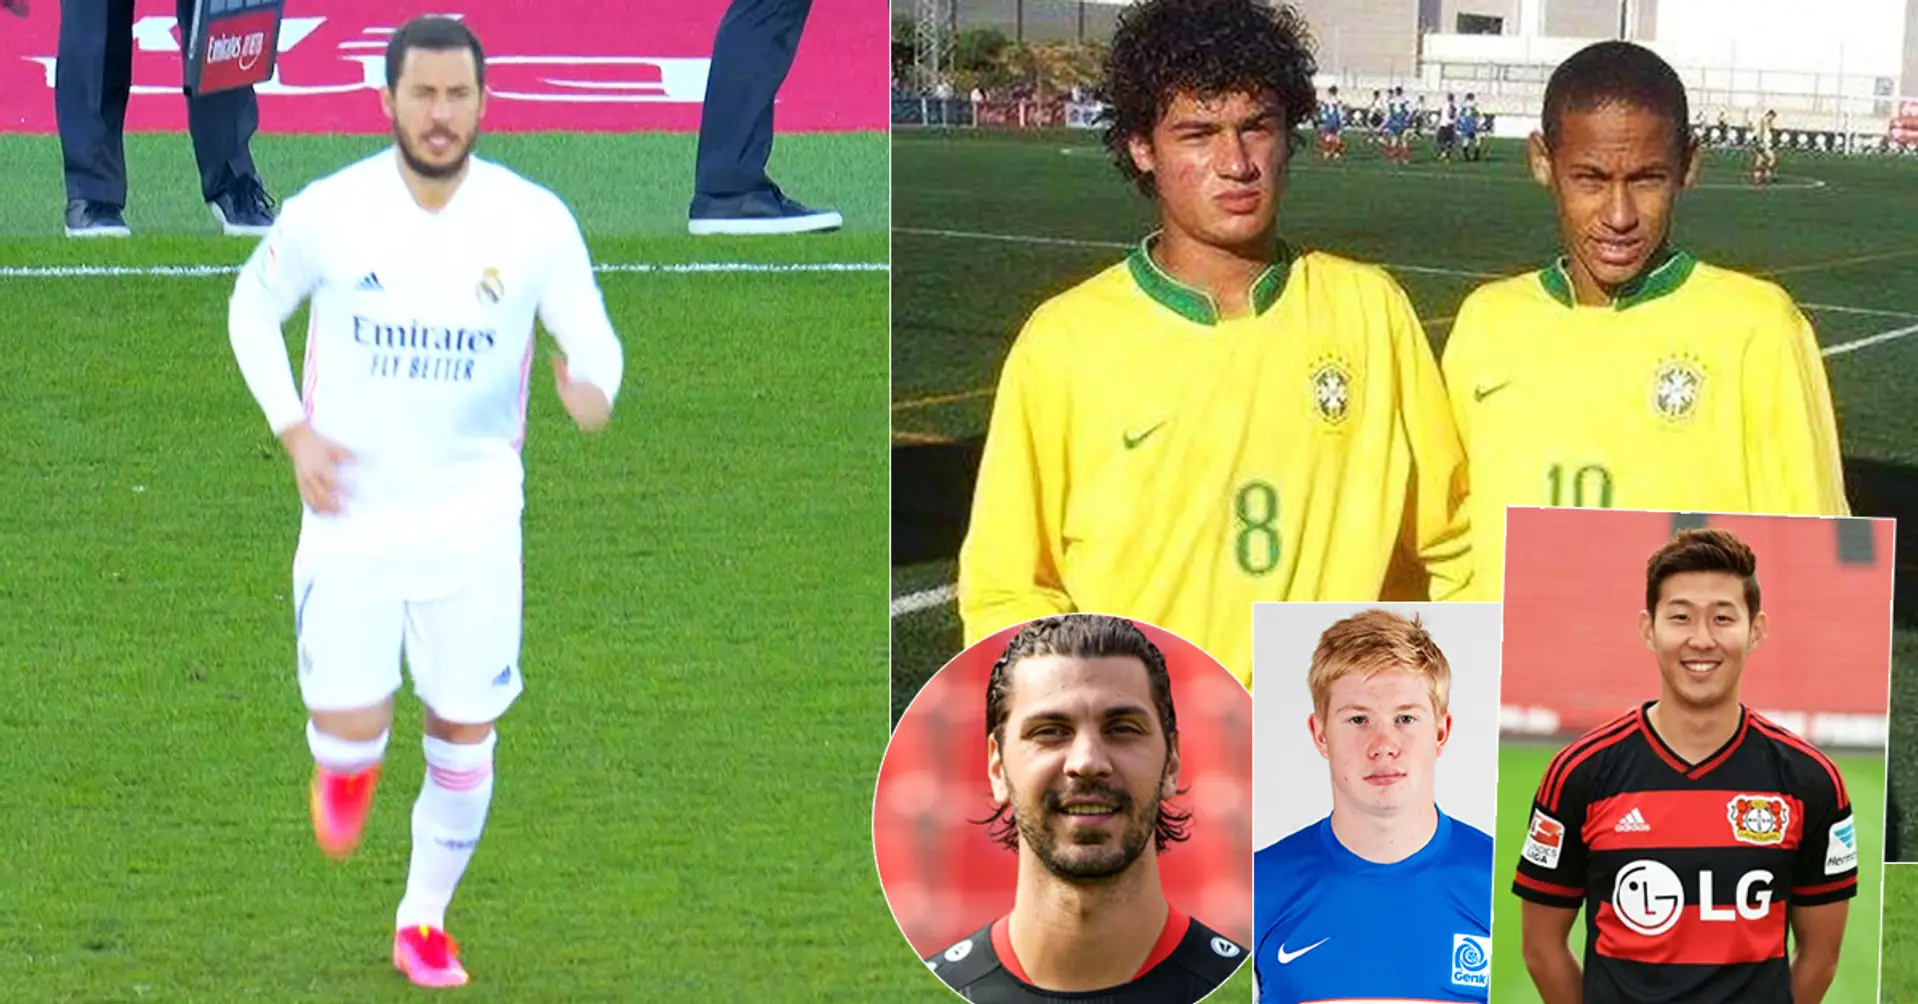 20 talents were tipped for stardom back in 2011 – all but 4 players lived up to hype